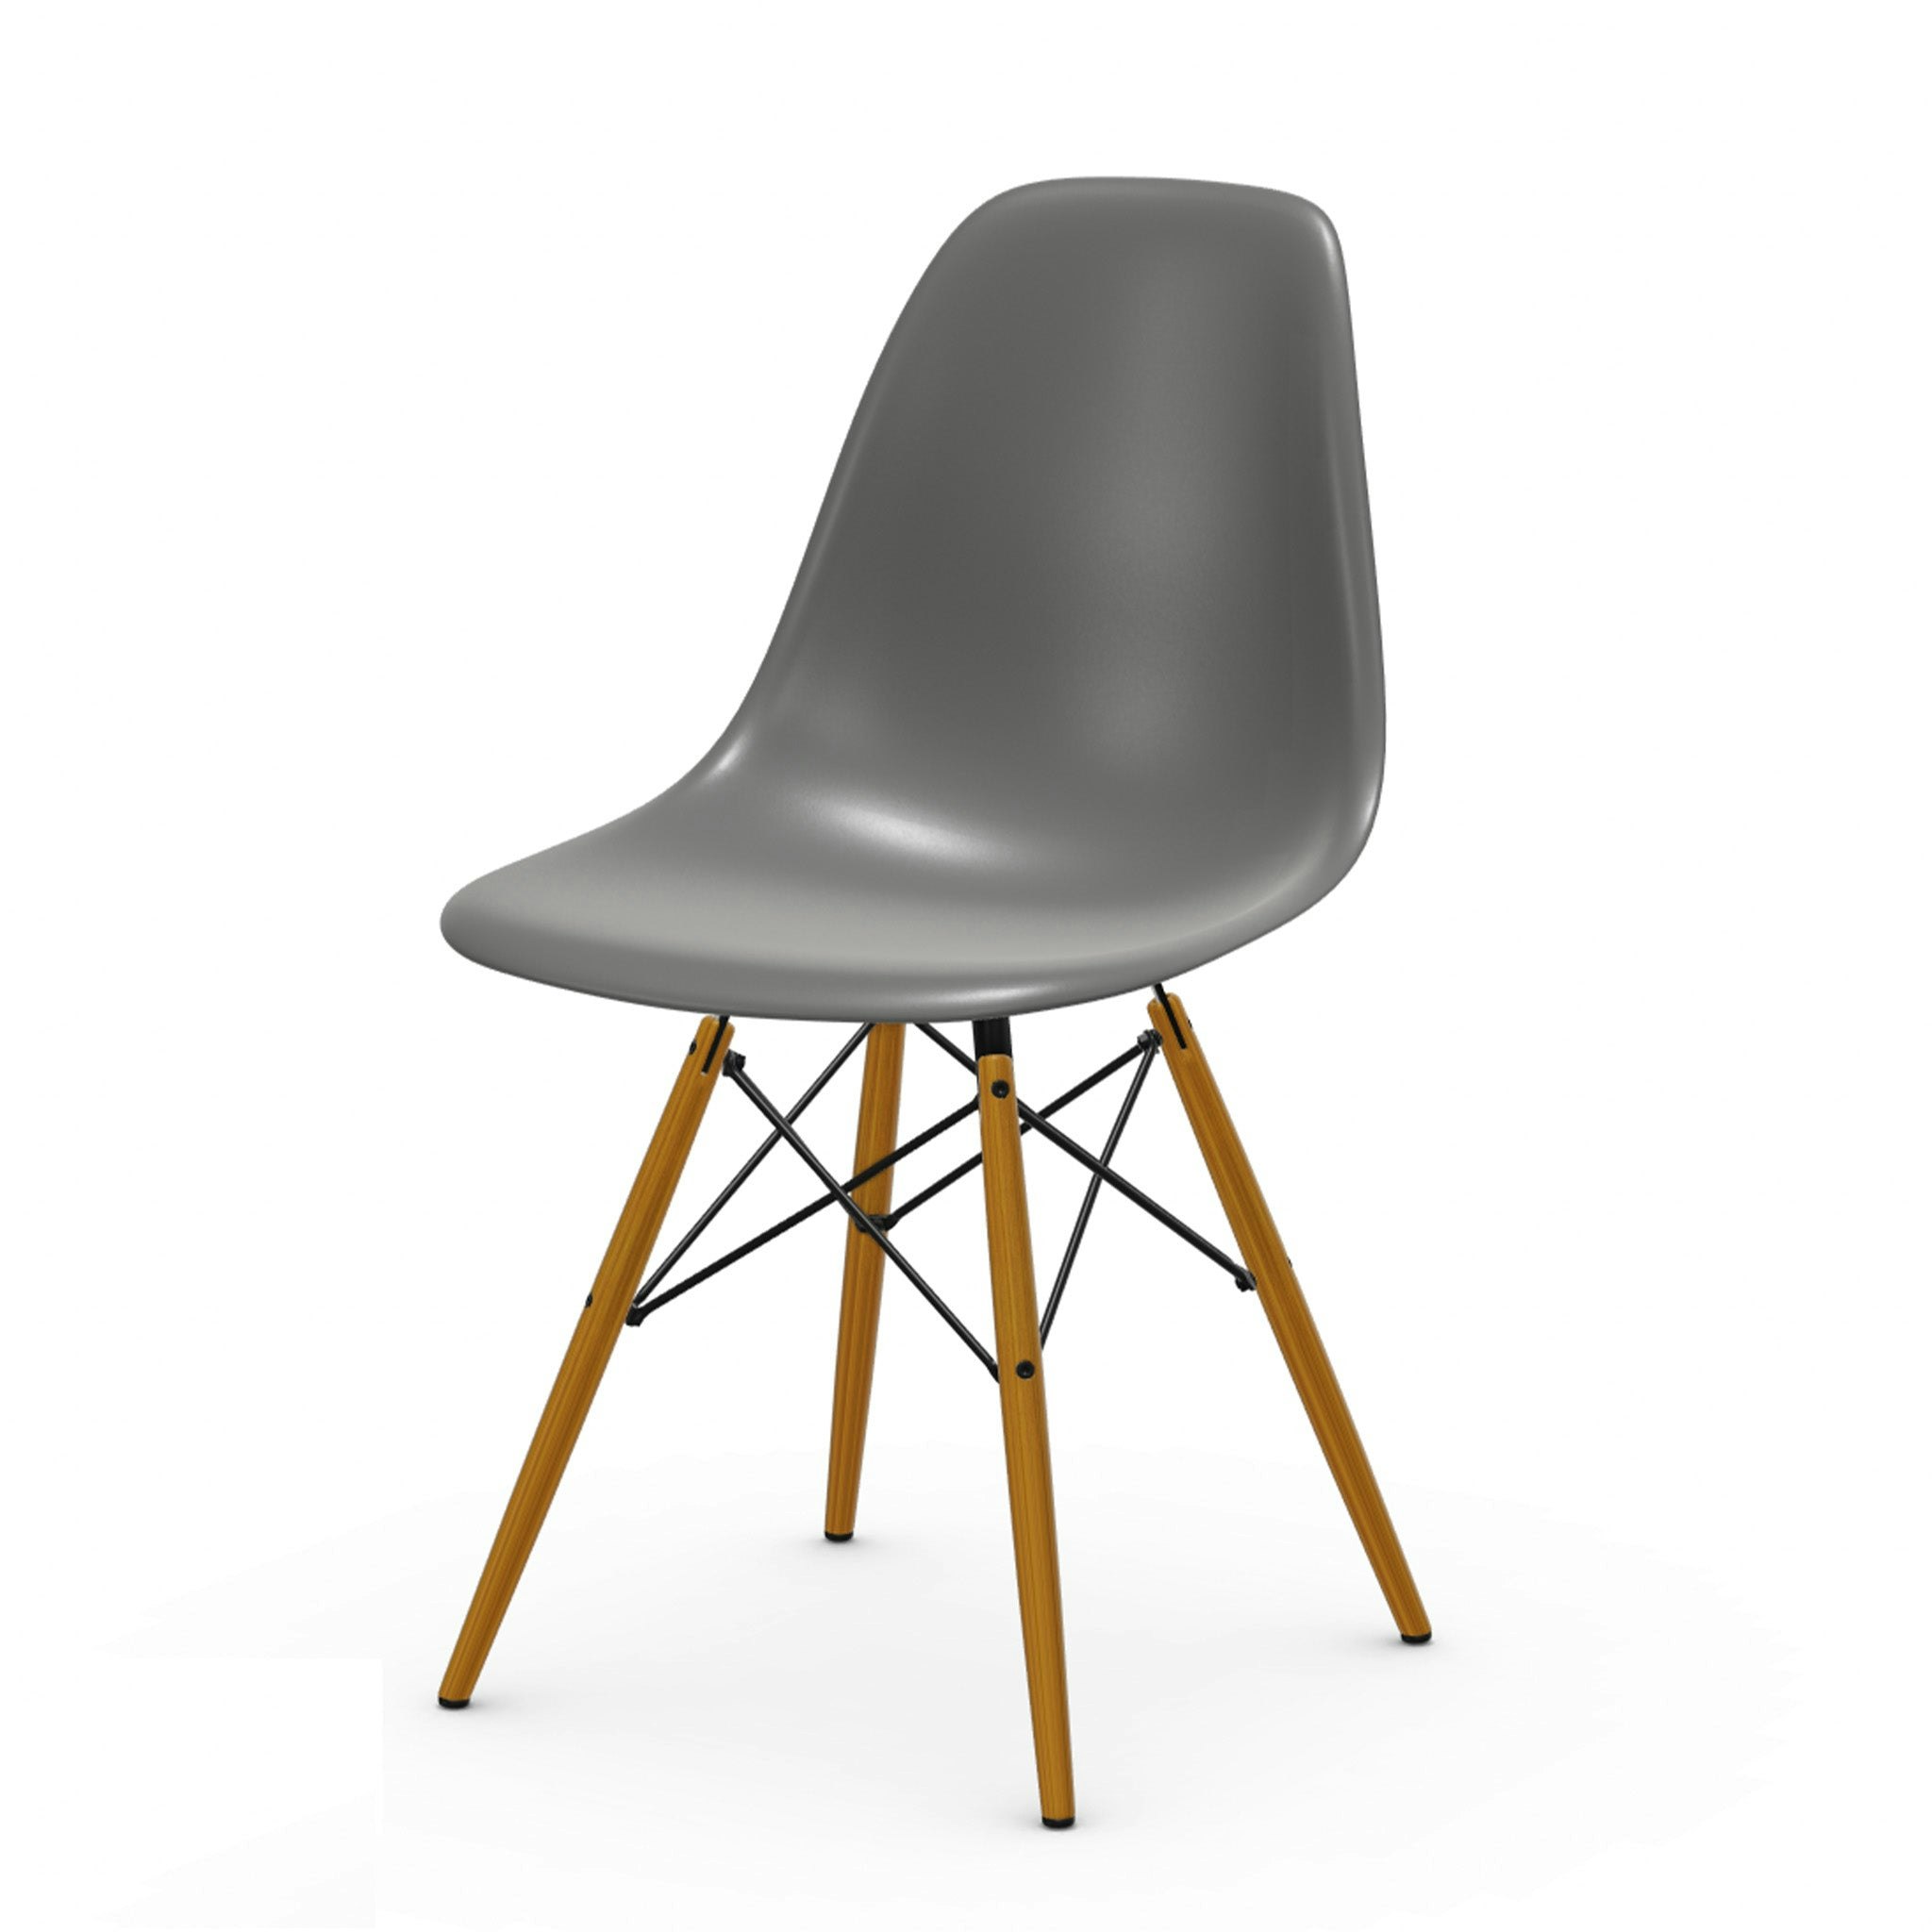 Clearance DSW Chair / Granite Grey / Honey Toned Ash by Vitra